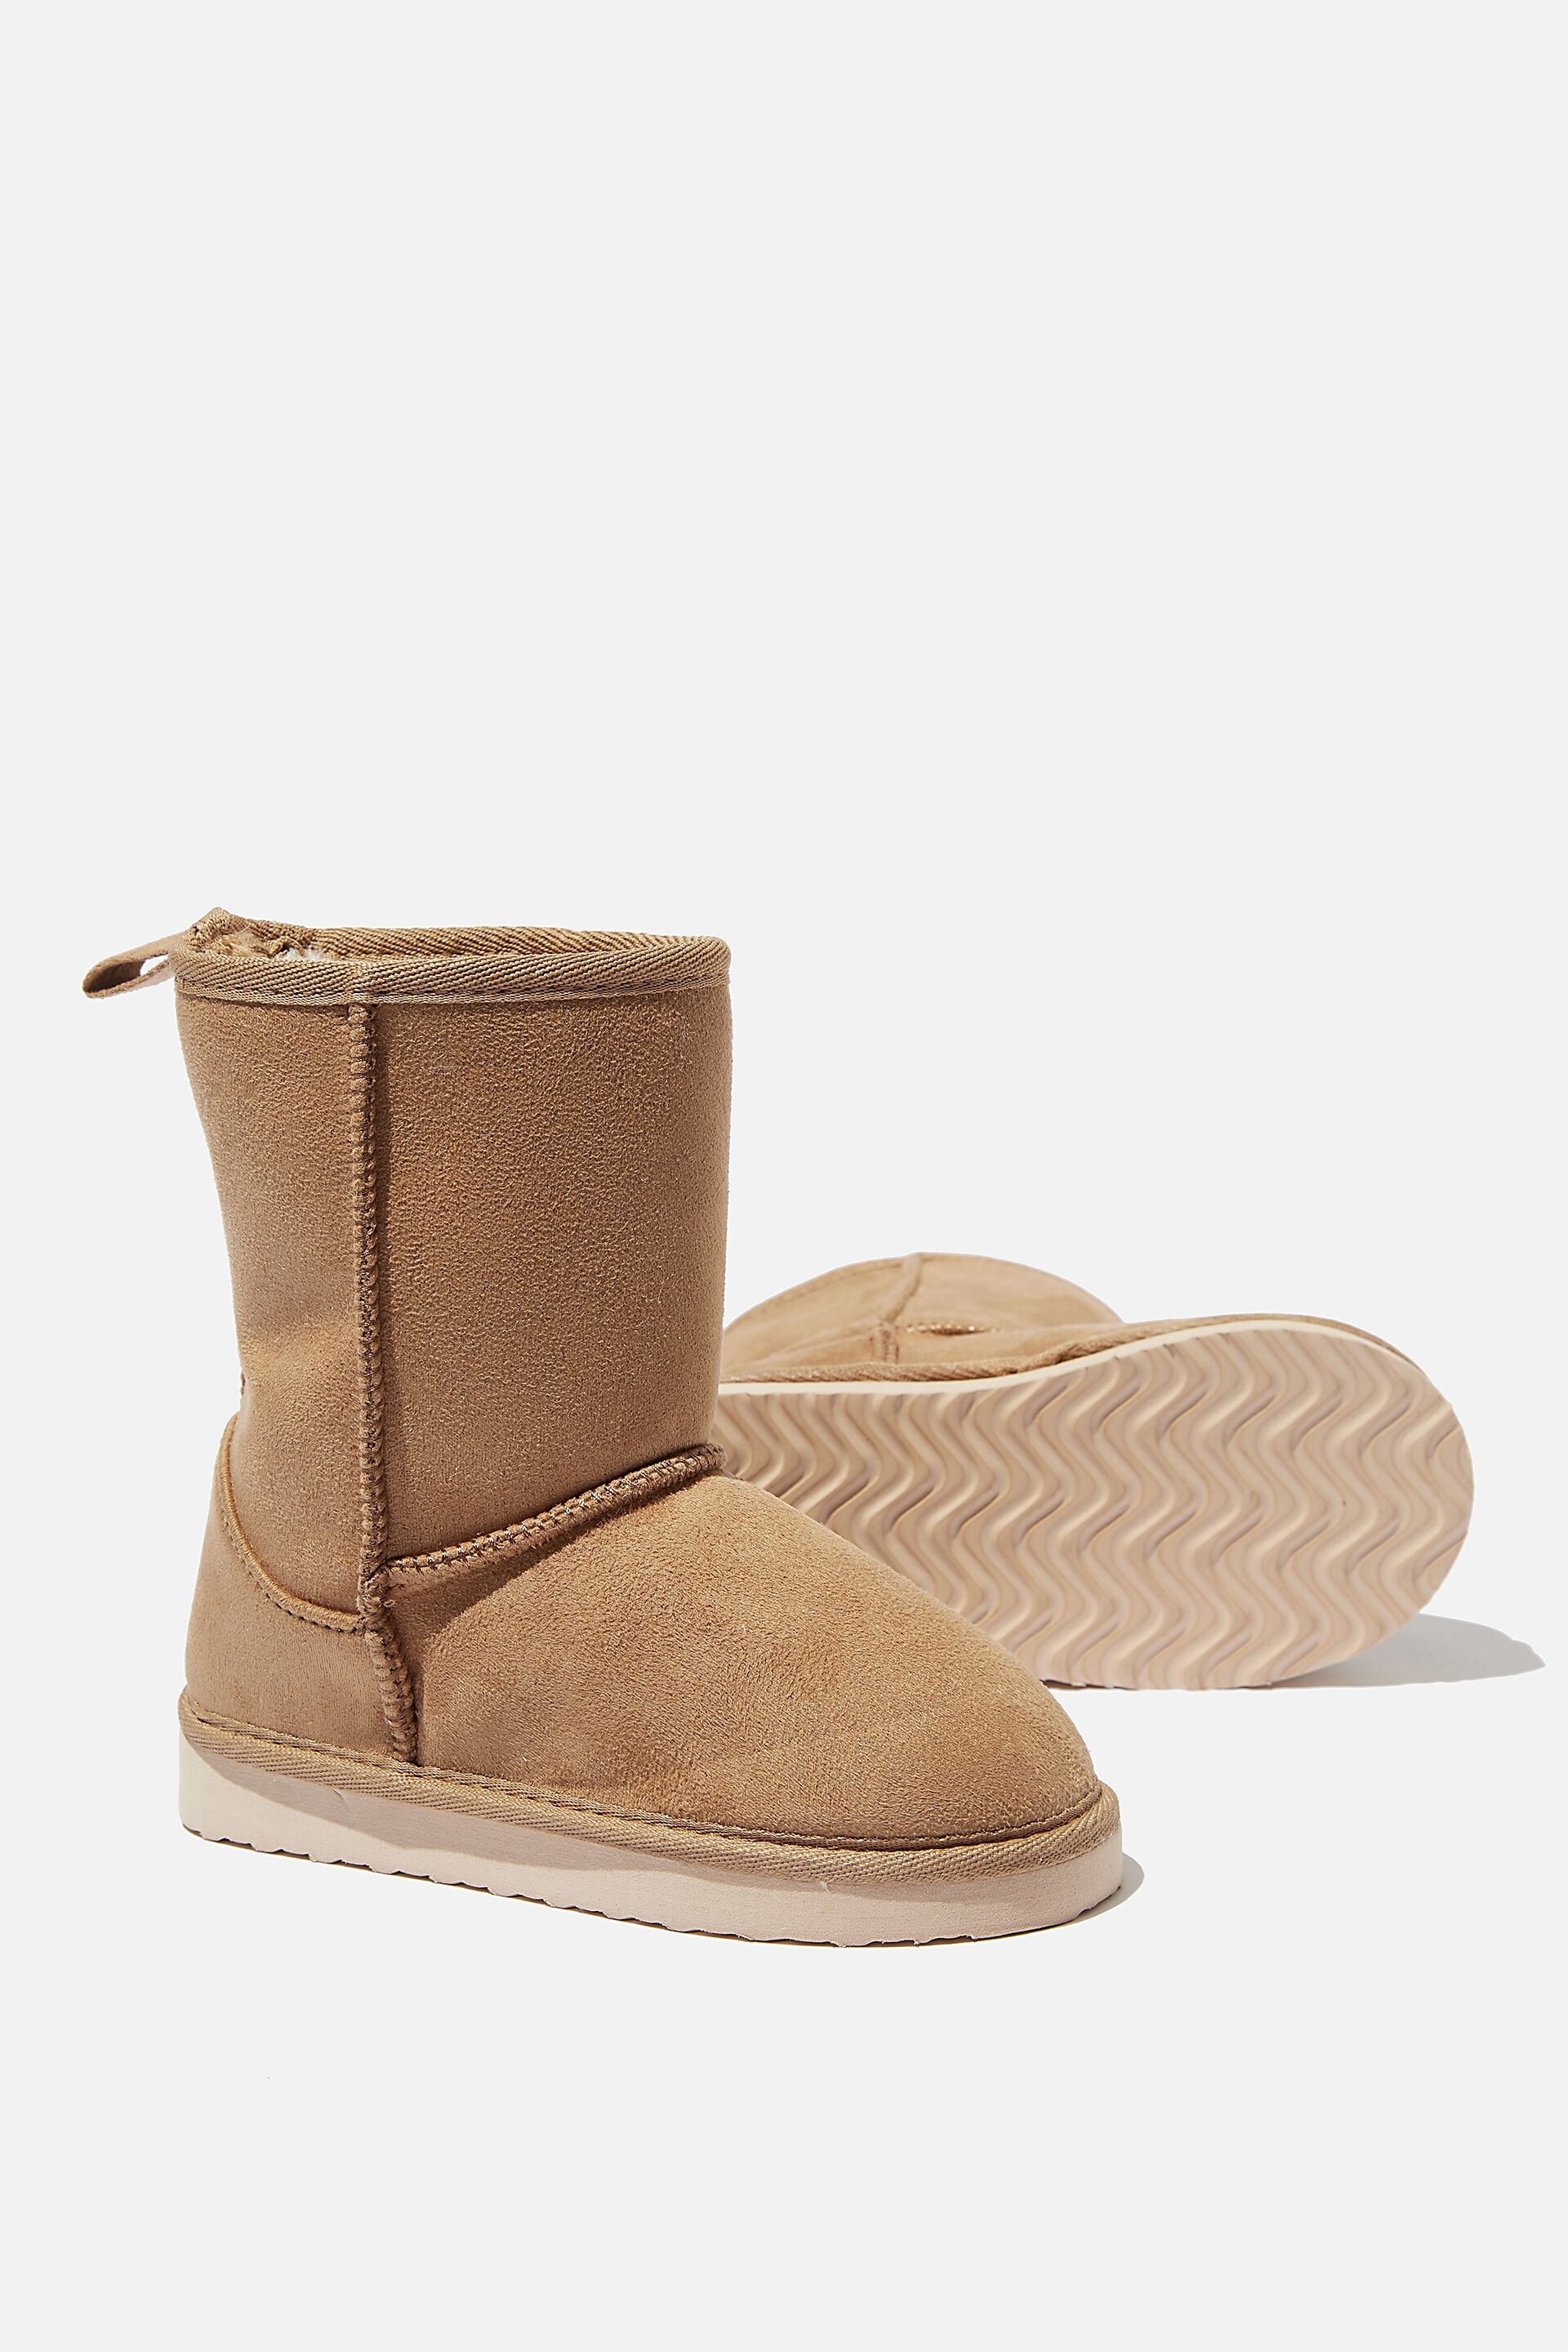 ugg boots cotton on Cheaper Than Retail 